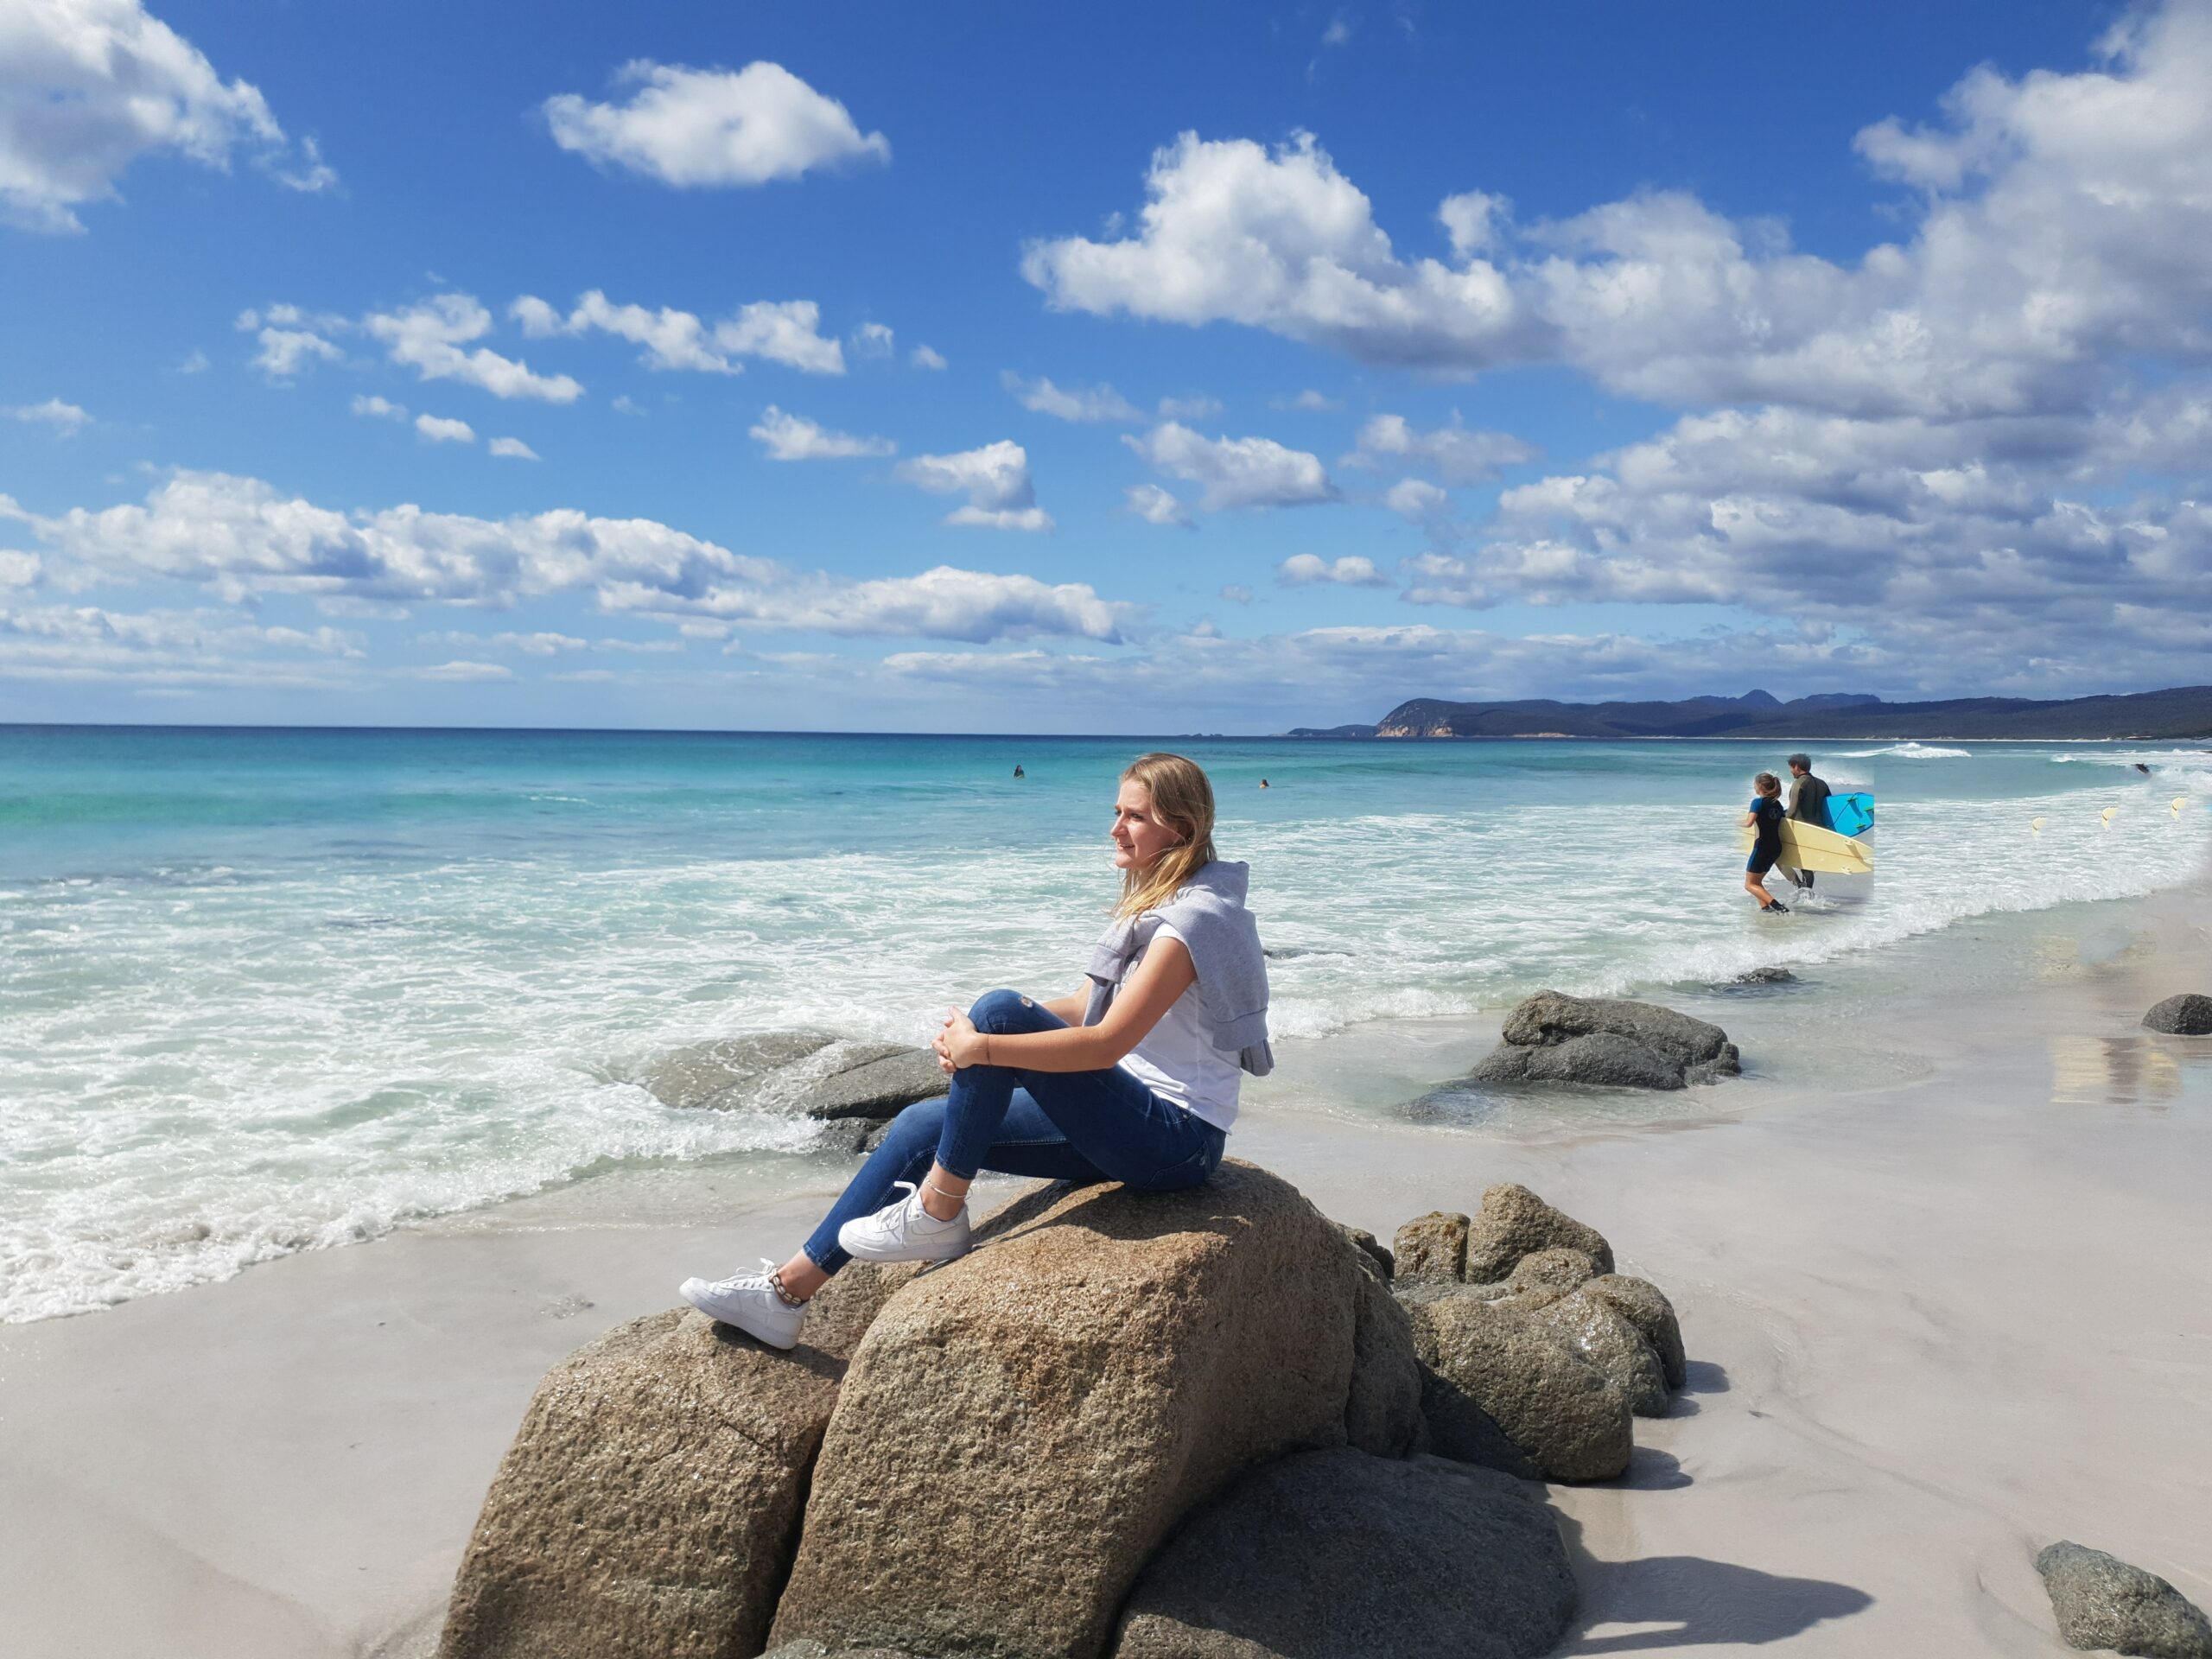 Wineglass Bay & Freycinet Day Tour from Hobart